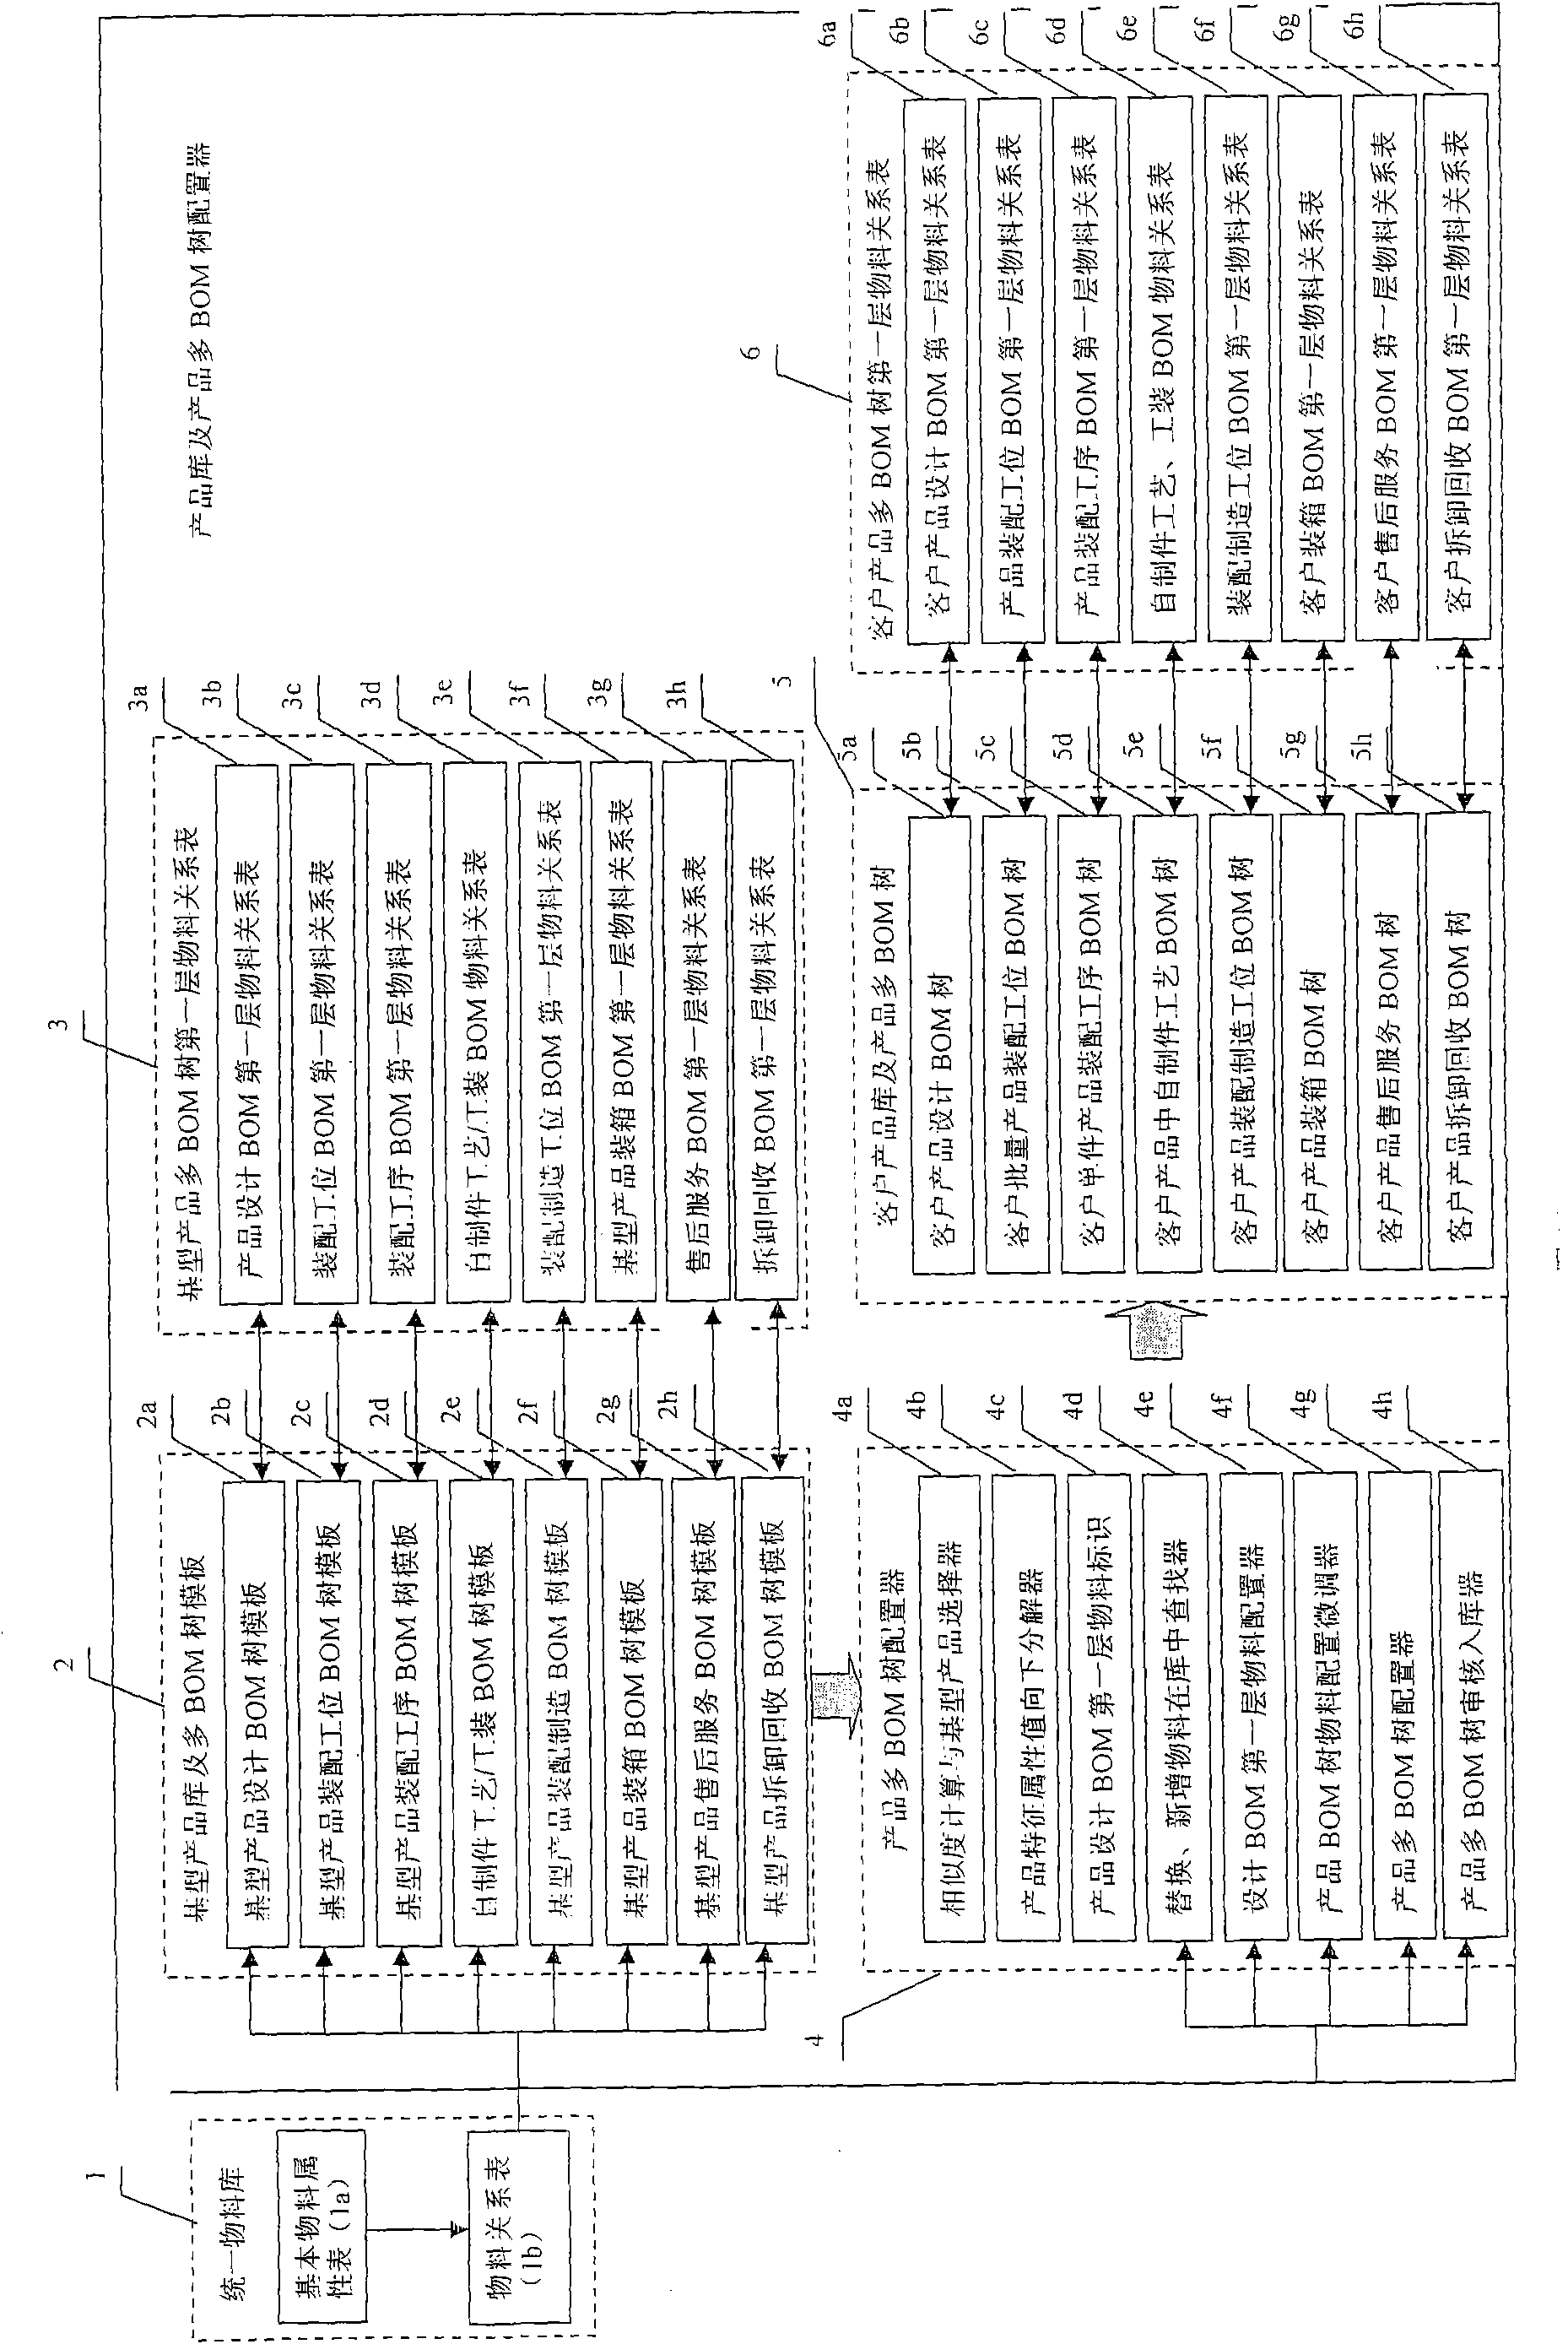 Method for configuring product multi-BOM tree based on base products